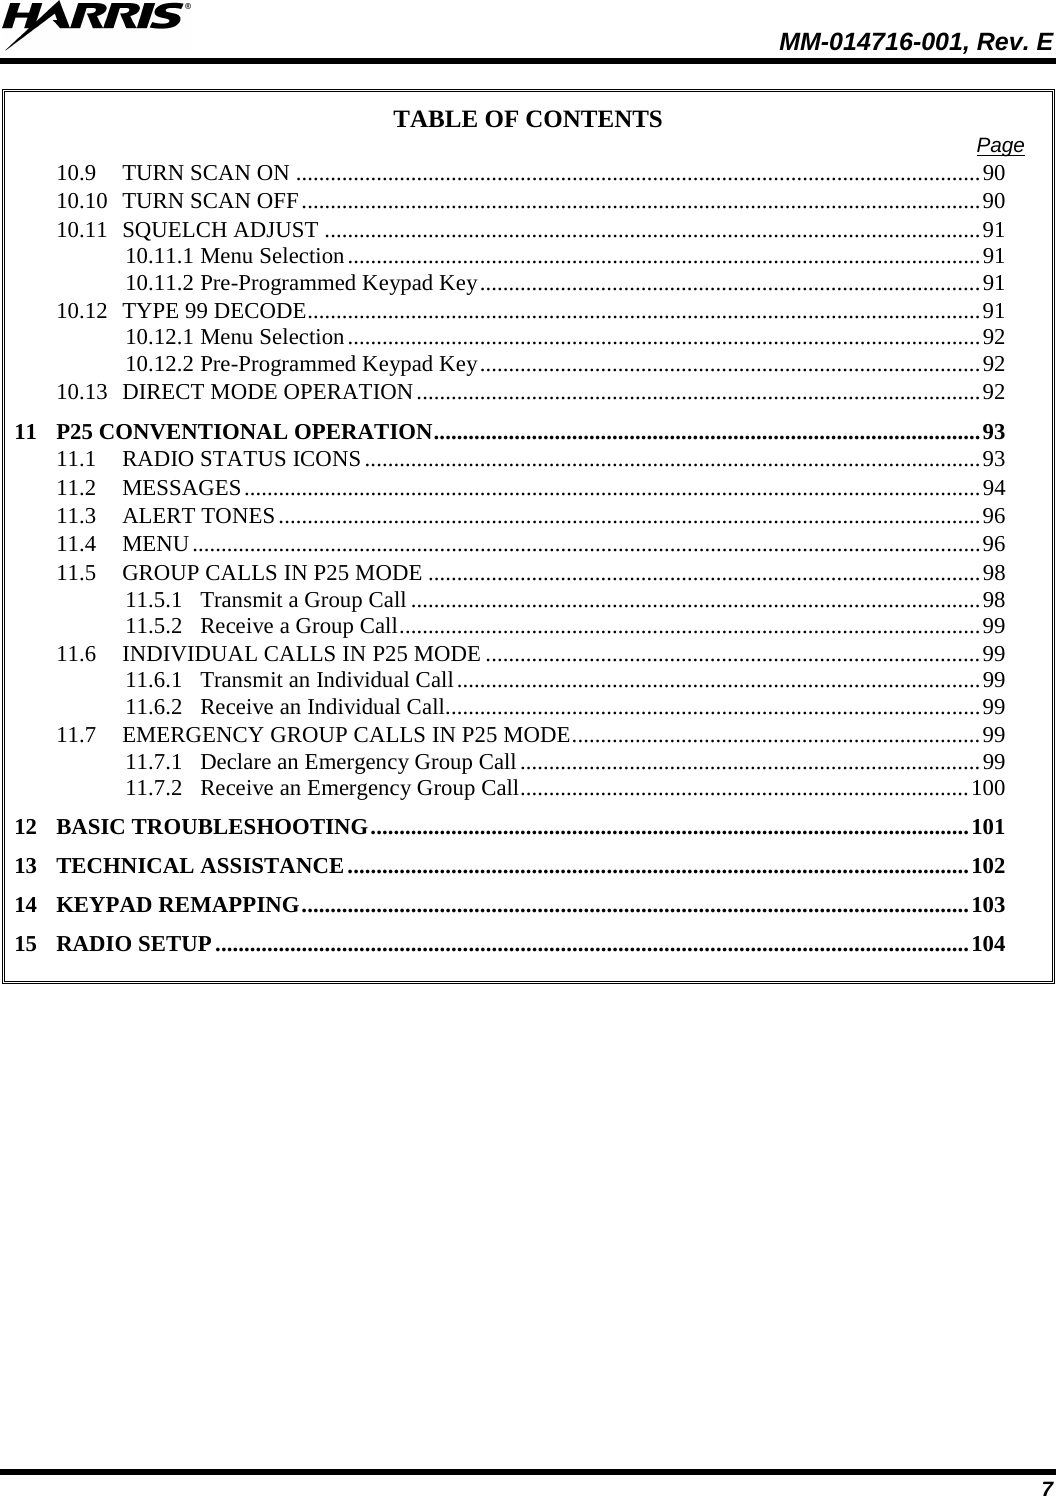  MM-014716-001, Rev. E 7 TABLE OF CONTENTS Page 10.9 TURN SCAN ON ....................................................................................................................... 90 10.10 TURN SCAN OFF ...................................................................................................................... 90 10.11 SQUELCH ADJUST .................................................................................................................. 91 10.11.1 Menu Selection .............................................................................................................. 91 10.11.2 Pre-Programmed Keypad Key ....................................................................................... 91 10.12 TYPE 99 DECODE ..................................................................................................................... 91 10.12.1 Menu Selection .............................................................................................................. 92 10.12.2 Pre-Programmed Keypad Key ....................................................................................... 92 10.13 DIRECT MODE OPERATION .................................................................................................. 92 11 P25 CONVENTIONAL OPERATION ............................................................................................... 93 11.1 RADIO STATUS ICONS ........................................................................................................... 93 11.2 MESSAGES ................................................................................................................................ 94 11.3 ALERT TONES .......................................................................................................................... 96 11.4 MENU ......................................................................................................................................... 96 11.5 GROUP CALLS IN P25 MODE ................................................................................................ 98 11.5.1 Transmit a Group Call ................................................................................................... 98 11.5.2 Receive a Group Call ..................................................................................................... 99 11.6 INDIVIDUAL CALLS IN P25 MODE ...................................................................................... 99 11.6.1 Transmit an Individual Call ........................................................................................... 99 11.6.2 Receive an Individual Call............................................................................................. 99 11.7 EMERGENCY GROUP CALLS IN P25 MODE ....................................................................... 99 11.7.1 Declare an Emergency Group Call ................................................................................ 99 11.7.2 Receive an Emergency Group Call .............................................................................. 100 12 BASIC TROUBLESHOOTING ........................................................................................................ 101 13 TECHNICAL ASSISTANCE ............................................................................................................ 102 14 KEYPAD REMAPPING .................................................................................................................... 103 15 RADIO SETUP ................................................................................................................................... 104  